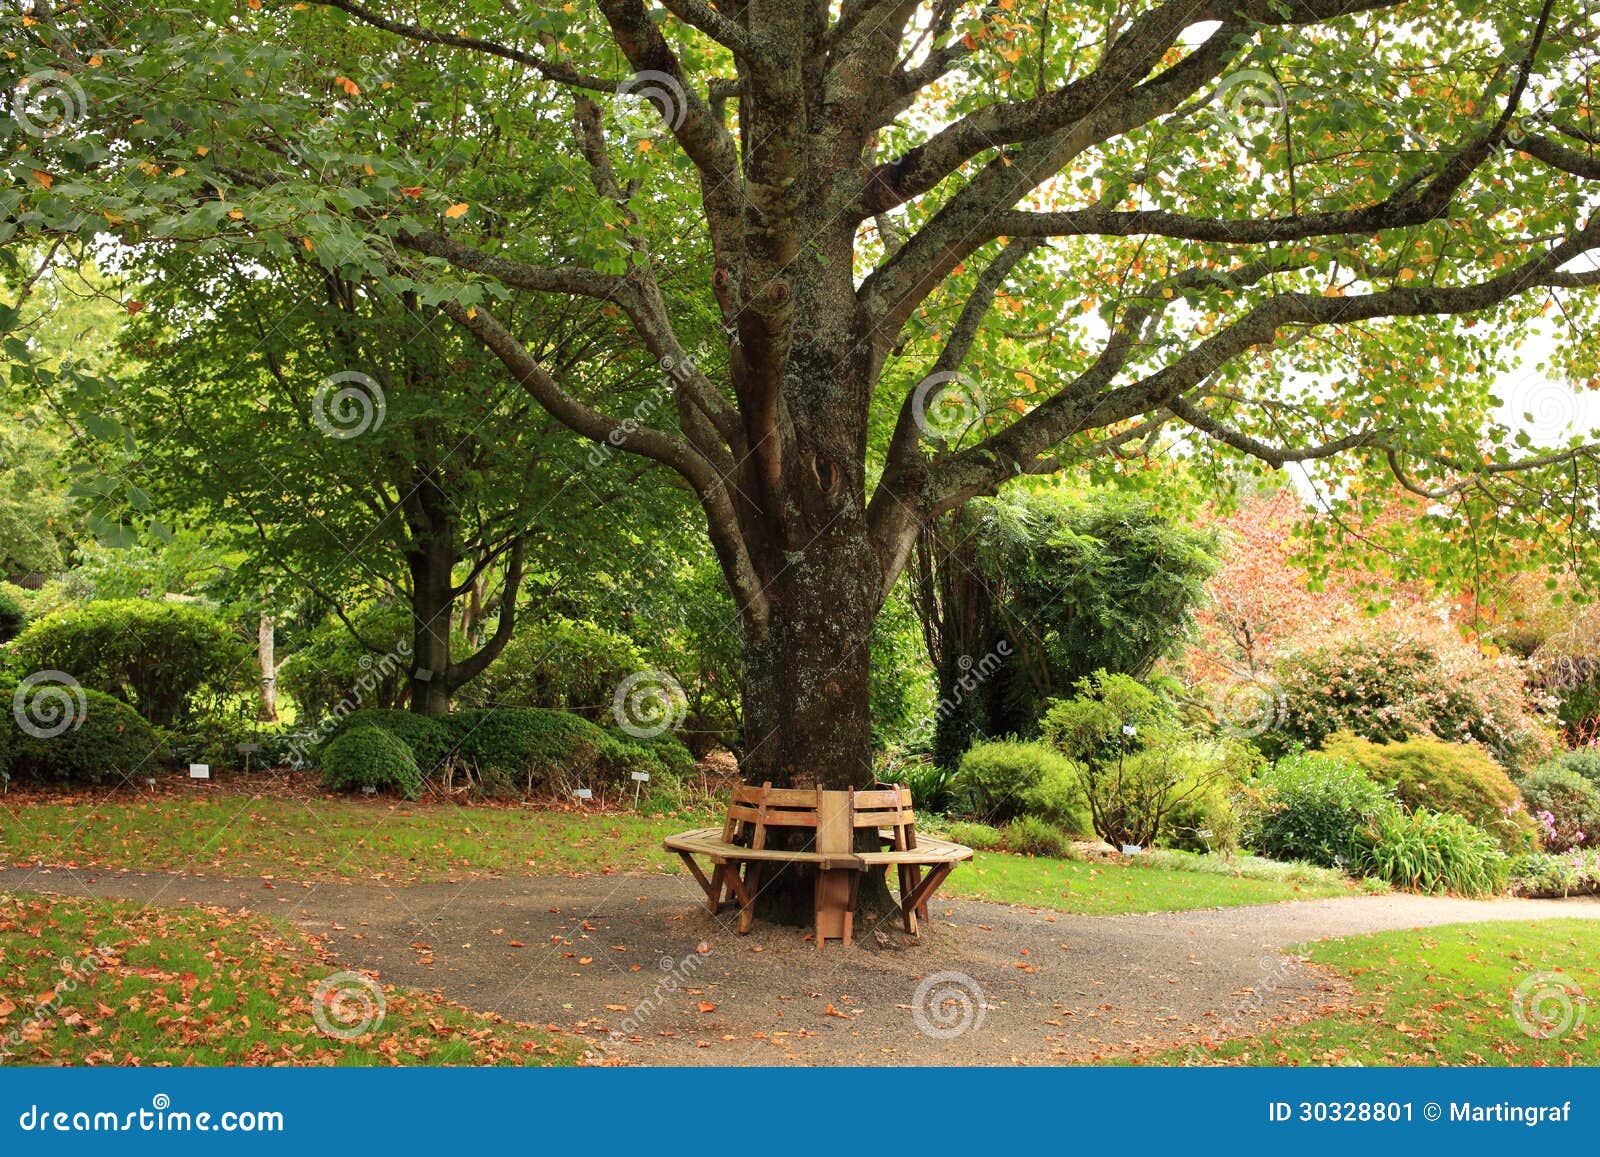 Bench Around Tree In Park At Fall Stock Image - Image 